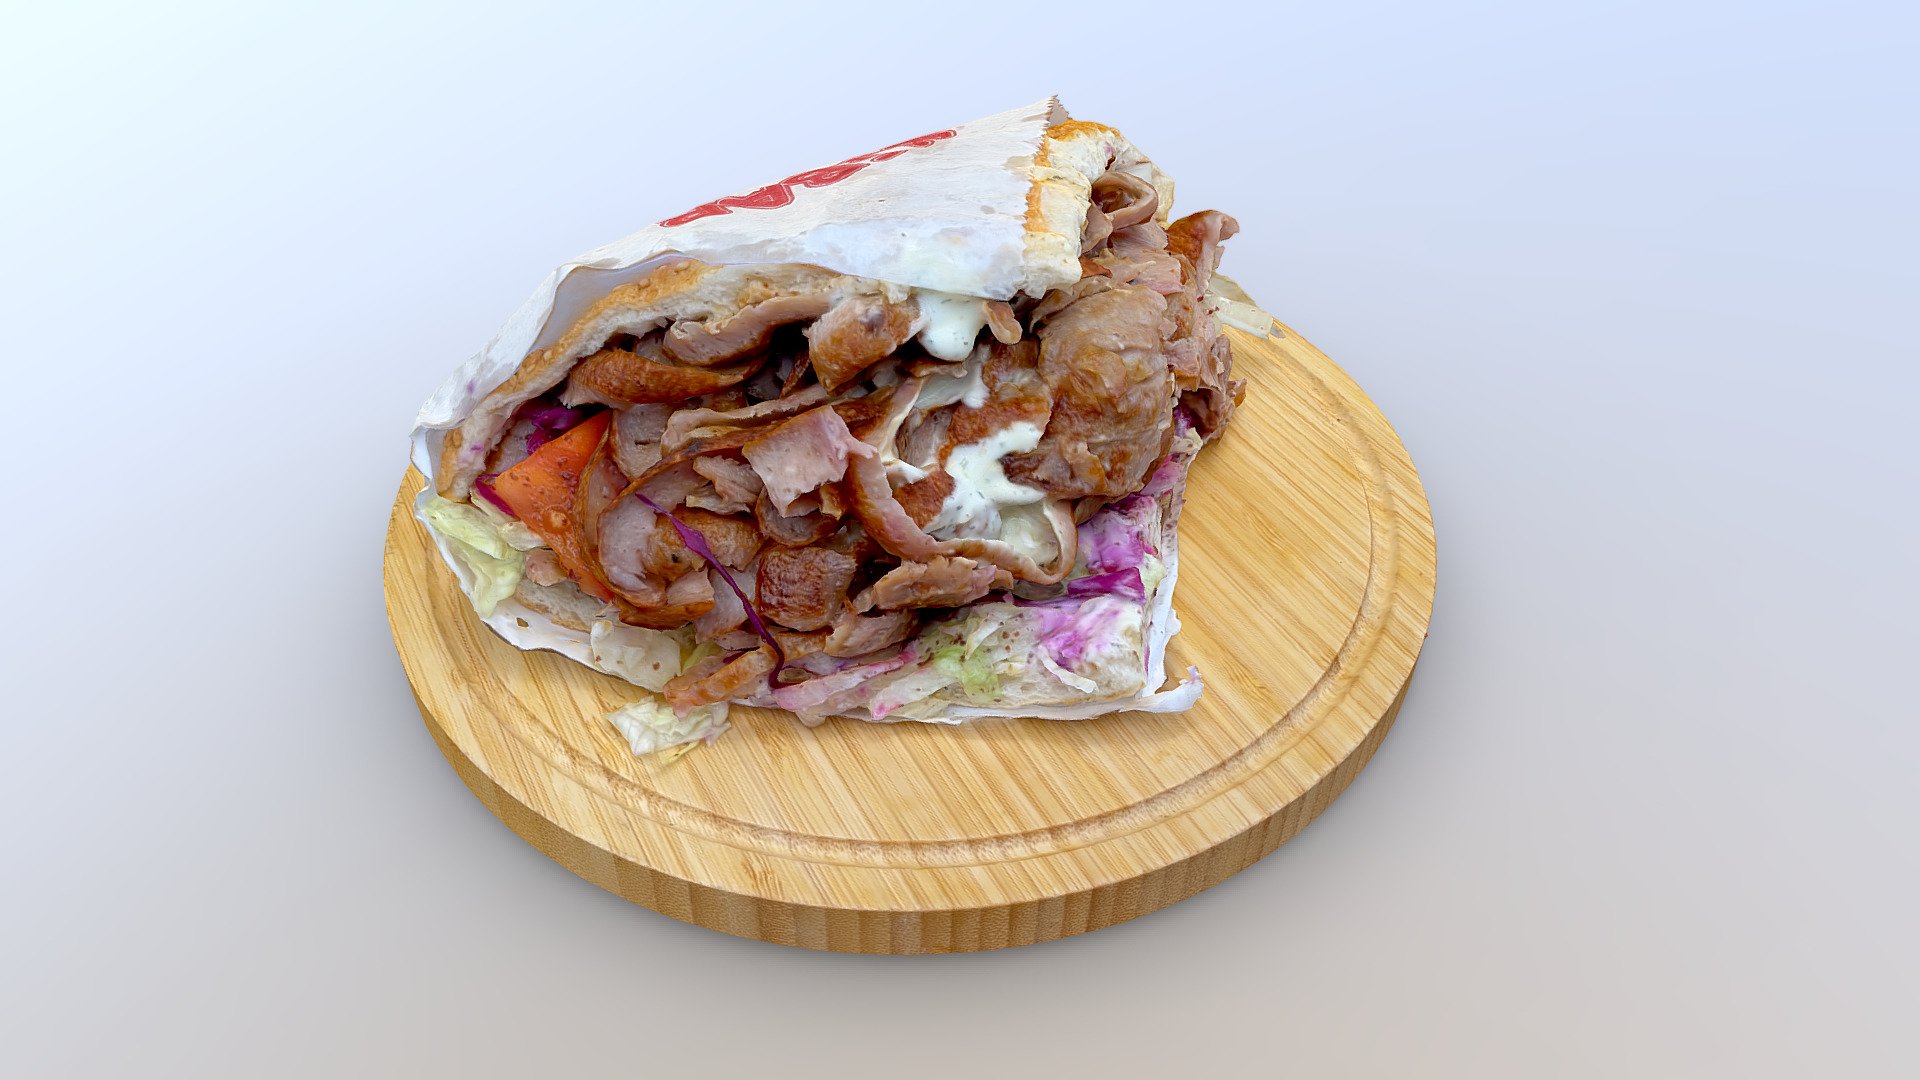 Enjoy a guilt-free, calorie-free Döner experience from Berlin!




Explore the Food Metaverse in AR/VR on Zoltanfood.com

Join me at the   Virtual Bistro and tour the World Food Gallery

Want to show support? Become a patron on Patreon

Stay updated! Follow me on Instagram and  Twitter

3D High Quality scan for Augmented Reality, Mixed Reality, Virtual reality, Near-Life Reality  (High and Low poly) - Döner Kebab - Buy Royalty Free 3D model by Zoltanfood 3d model